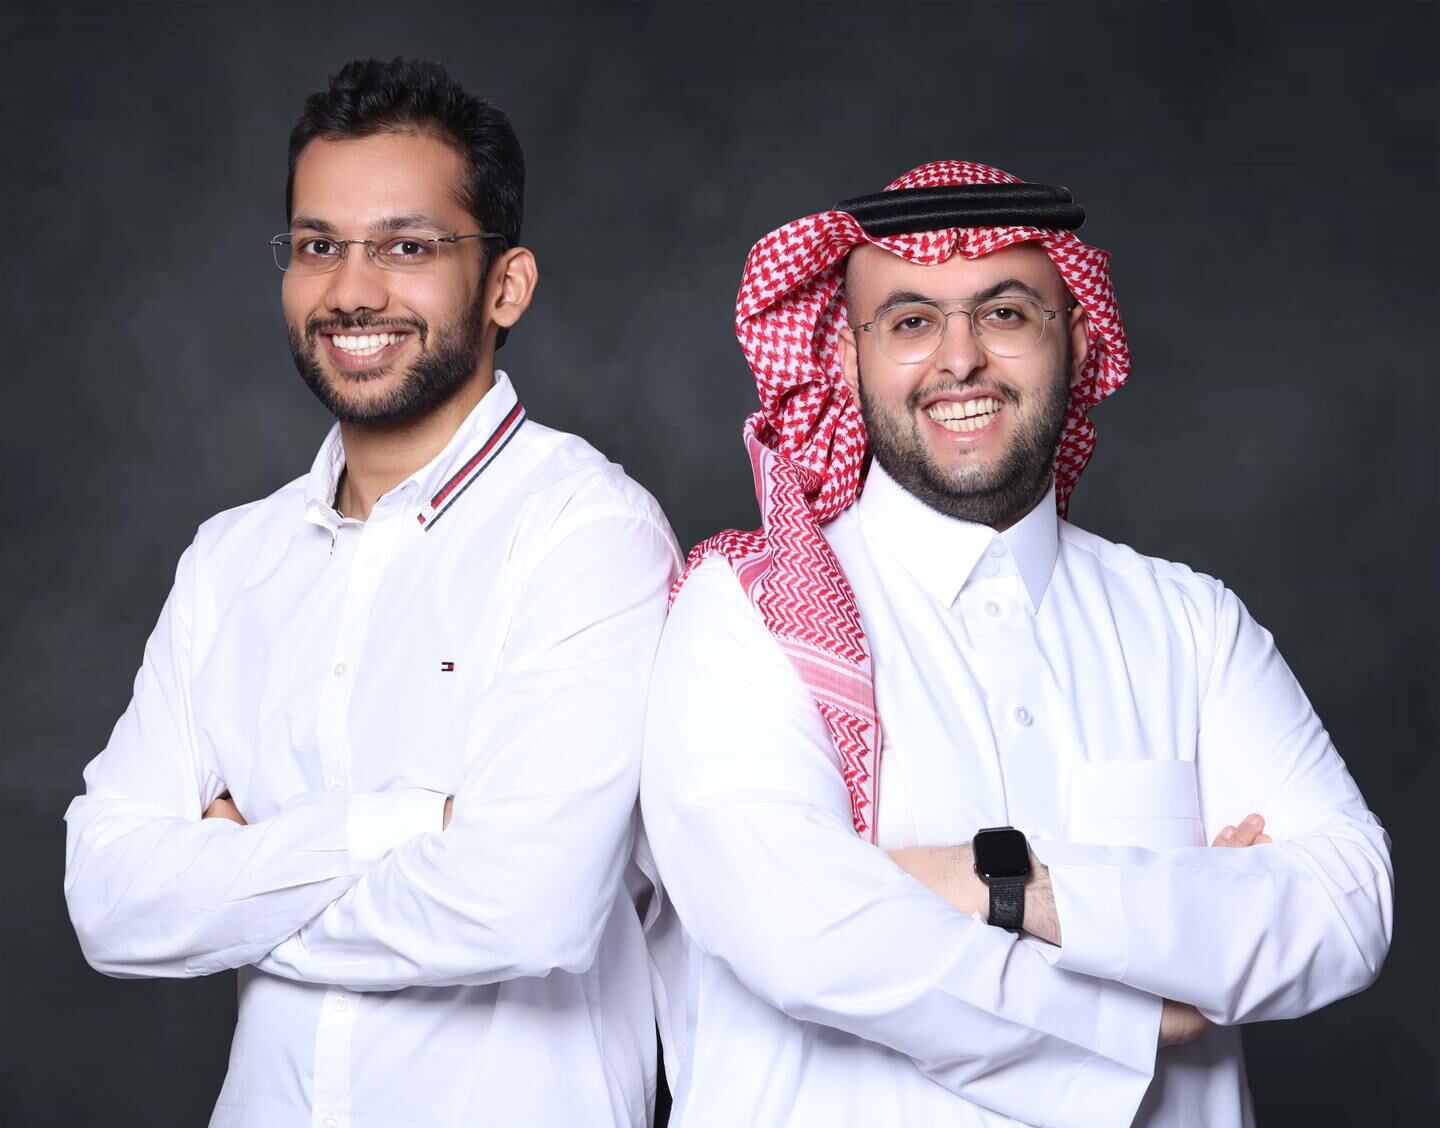 The FinTech start-up was founded in 2021 by Nitish Mittal (left) and Turki Alshaikh. Photo: InvestSky